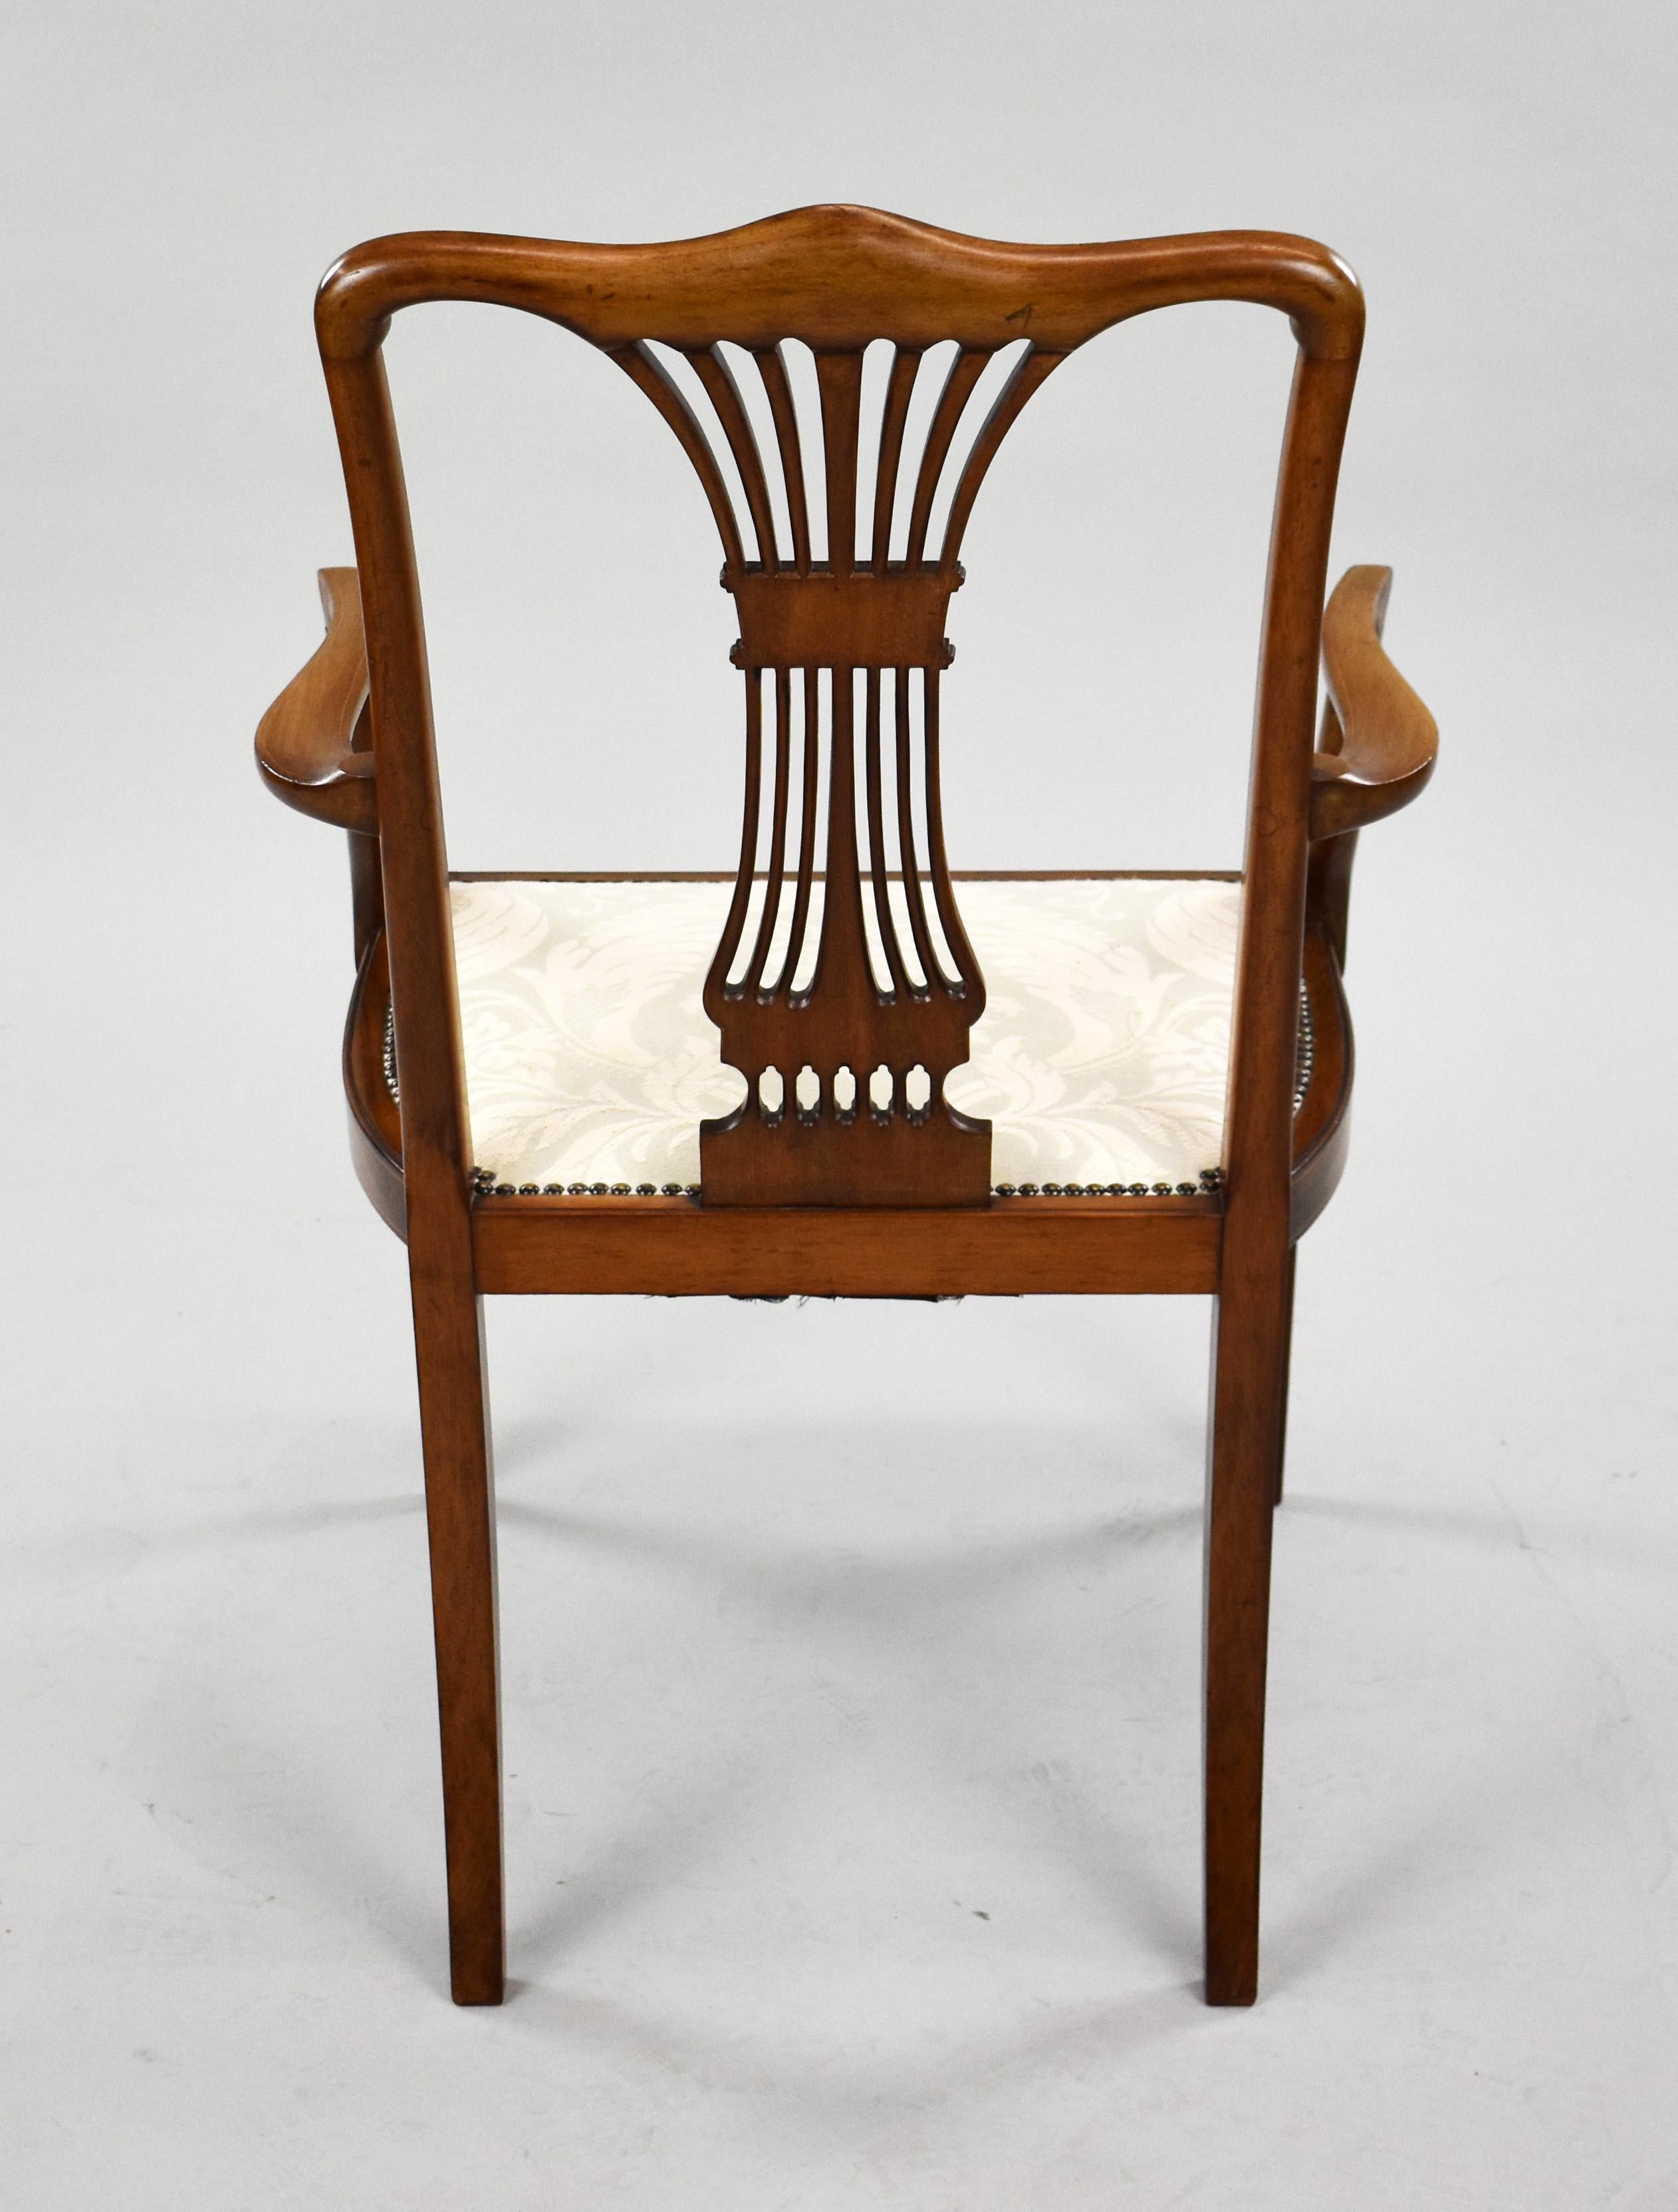 Mahogany 20th Century English Edwardian Inlaid Open Armchair For Sale